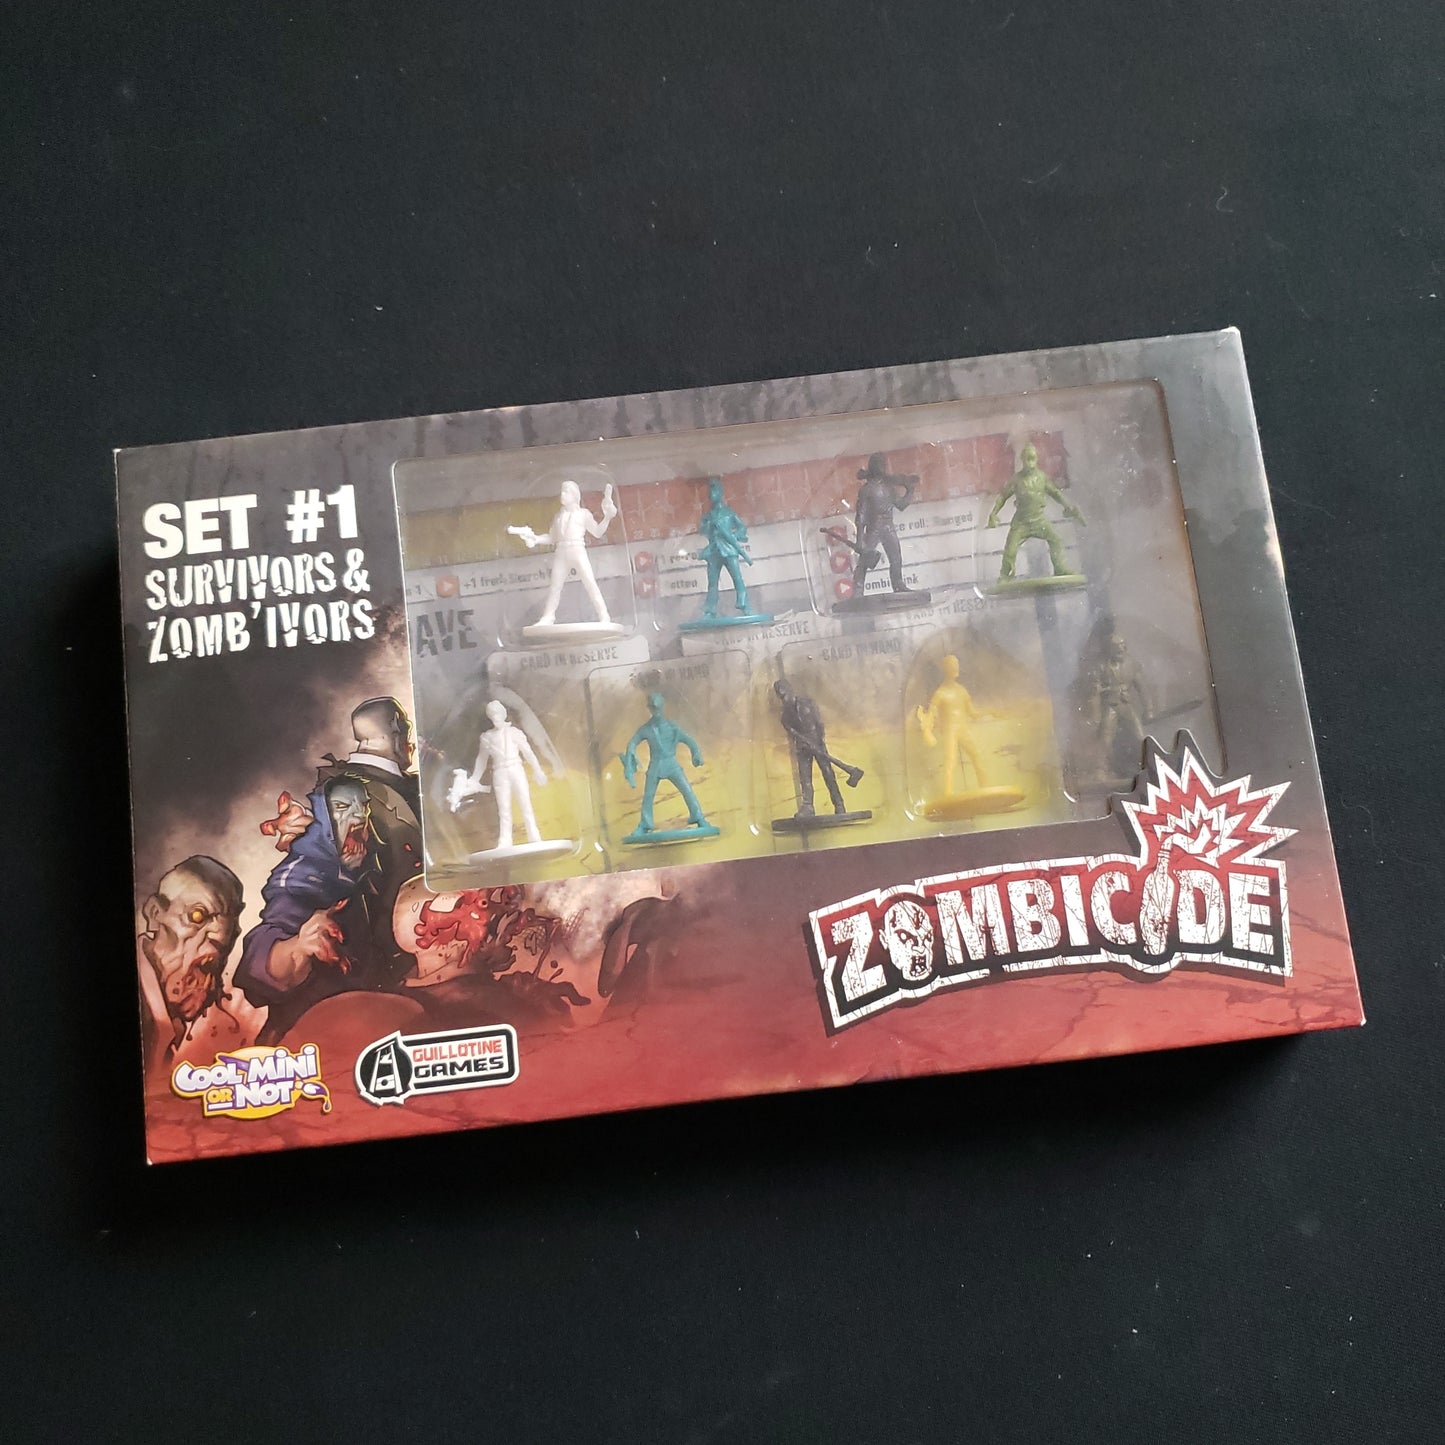 Image shows the front cover of the box of the Set 1 Survivors miniature pack for the Zombicide board game